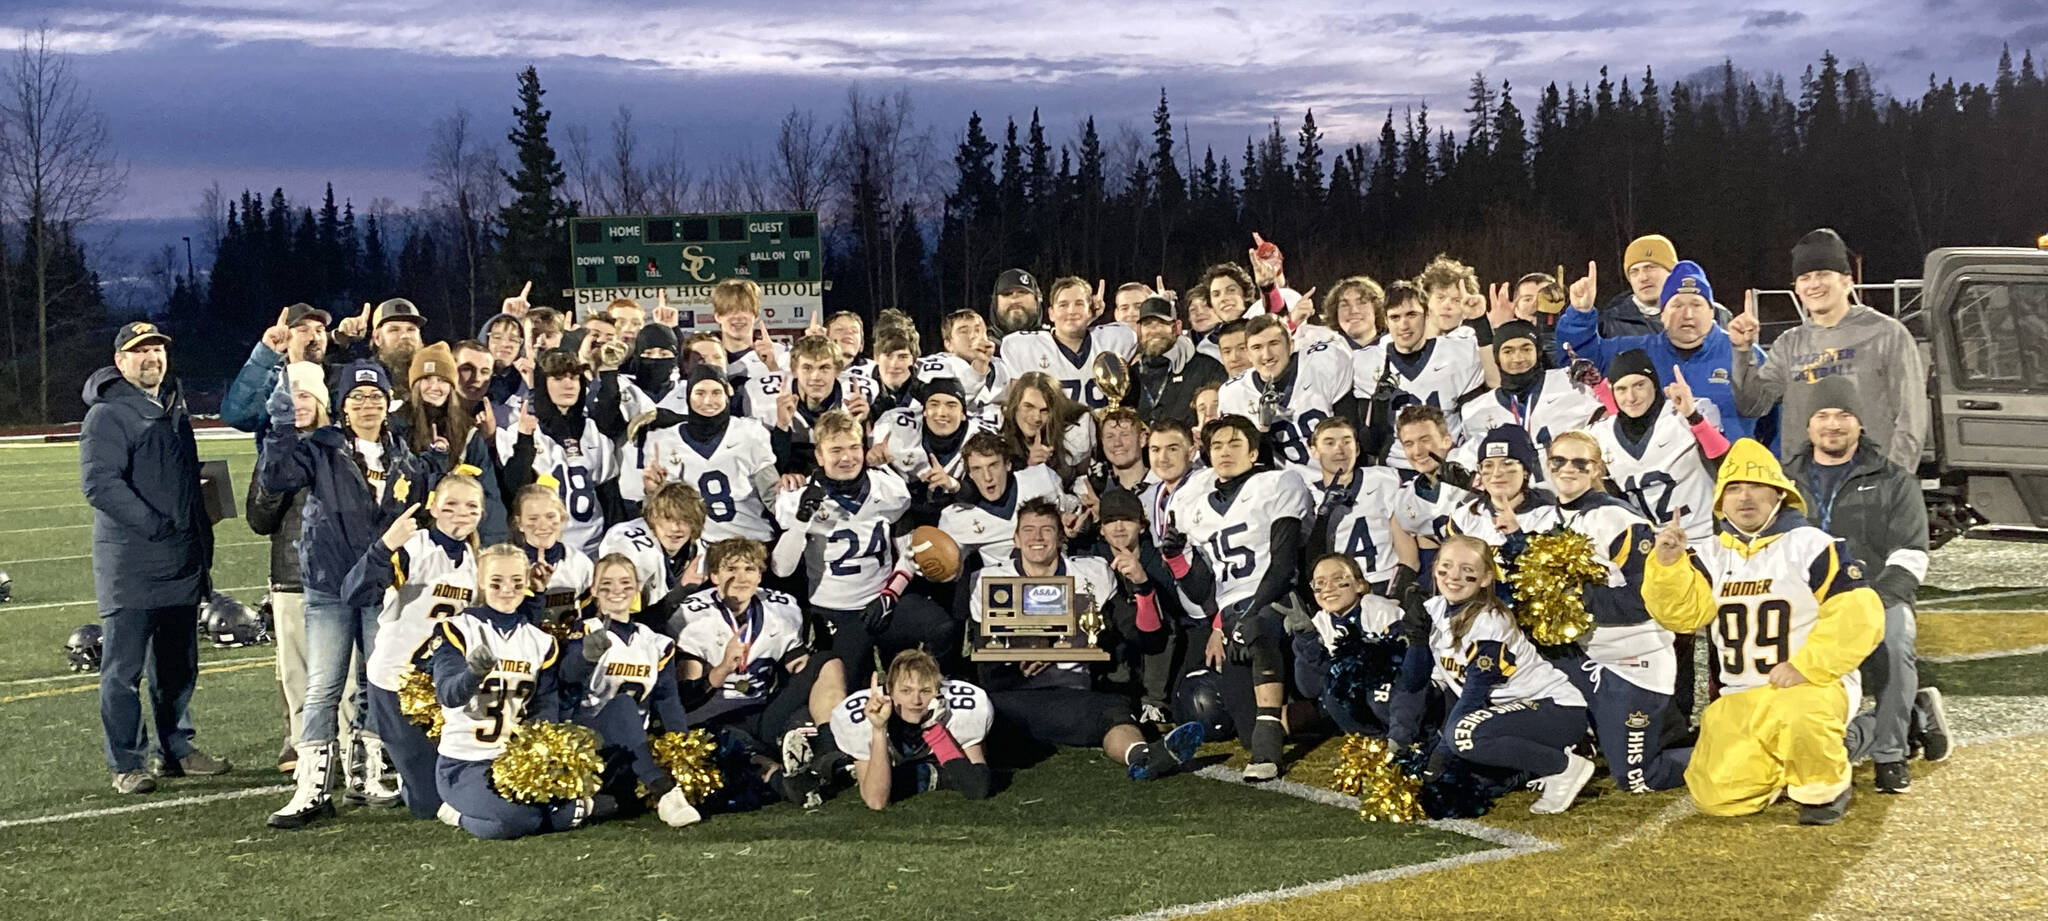 Homer celebrates winning the Division III state championship Saturday, Oct. 15, 2022, at Service High School in Anchorage, Alaska. (Photo by Jeff Helminiak/Peninsula Clarion)